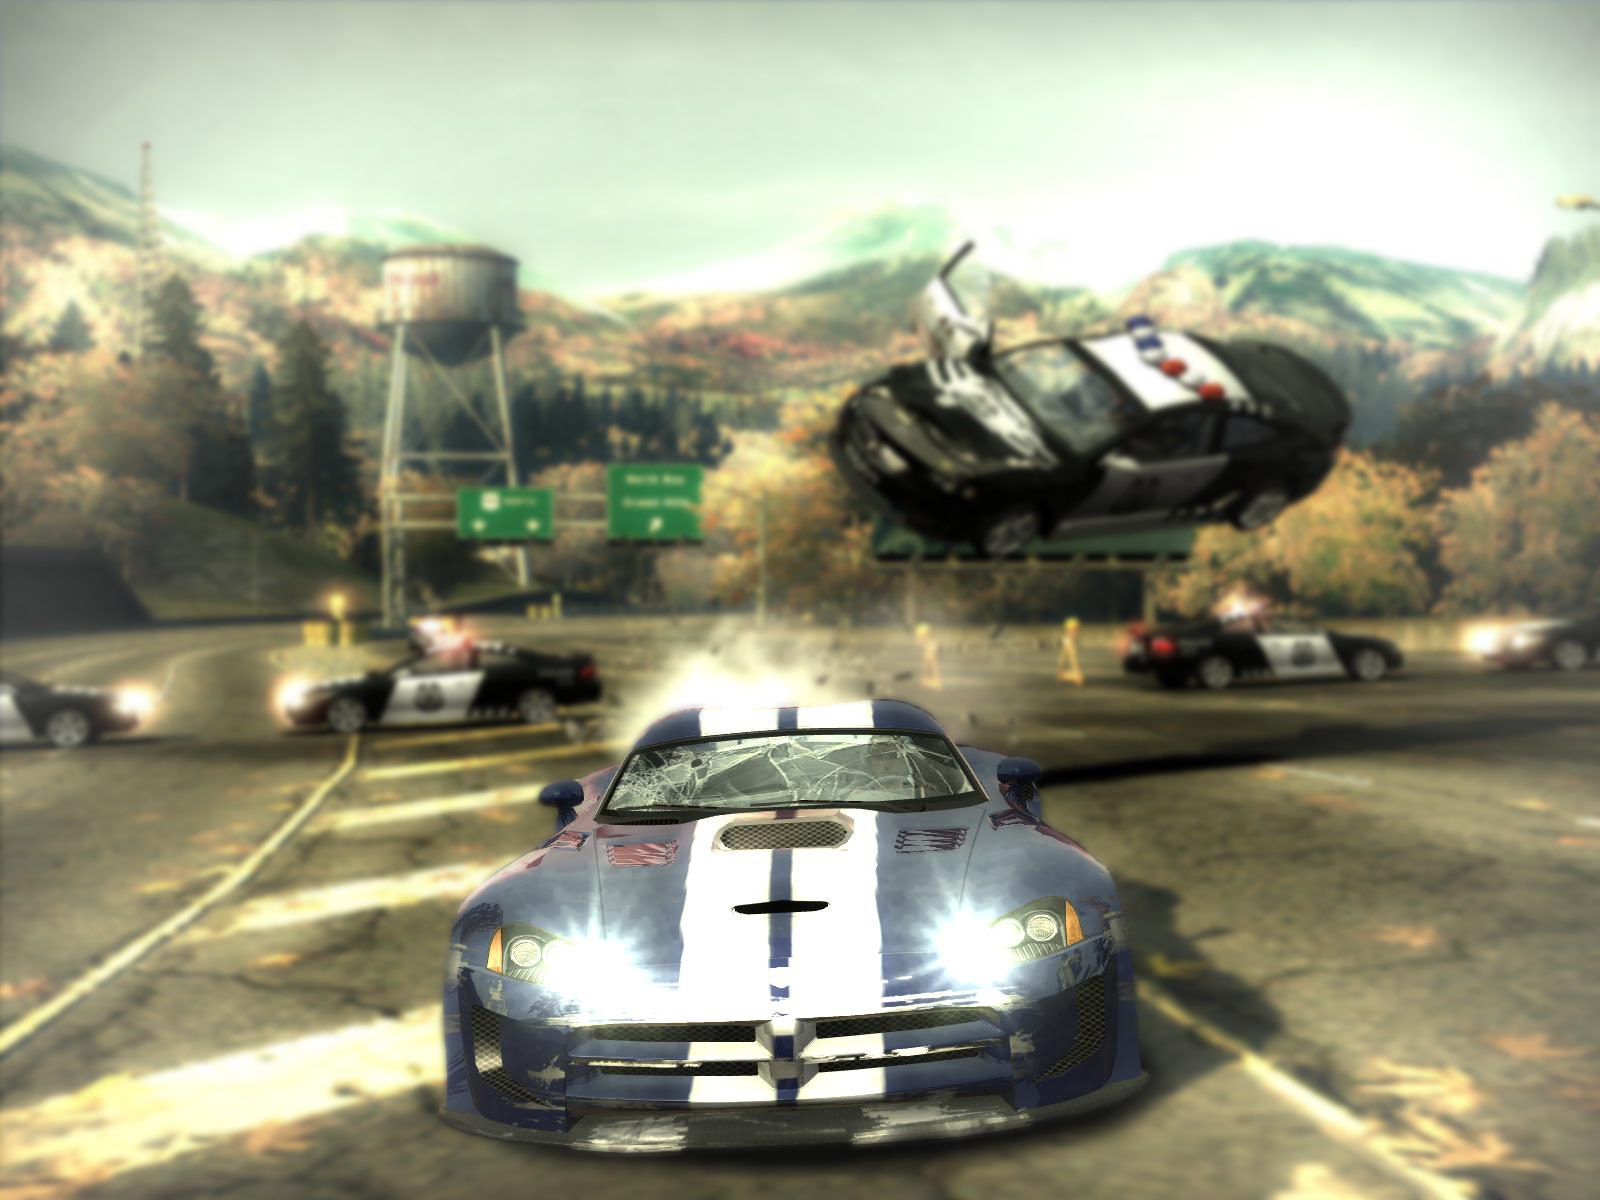  Wallpapers  Desktop on Video Games Cars Need For Speed Most Wanted Hd Wallpaper   Games